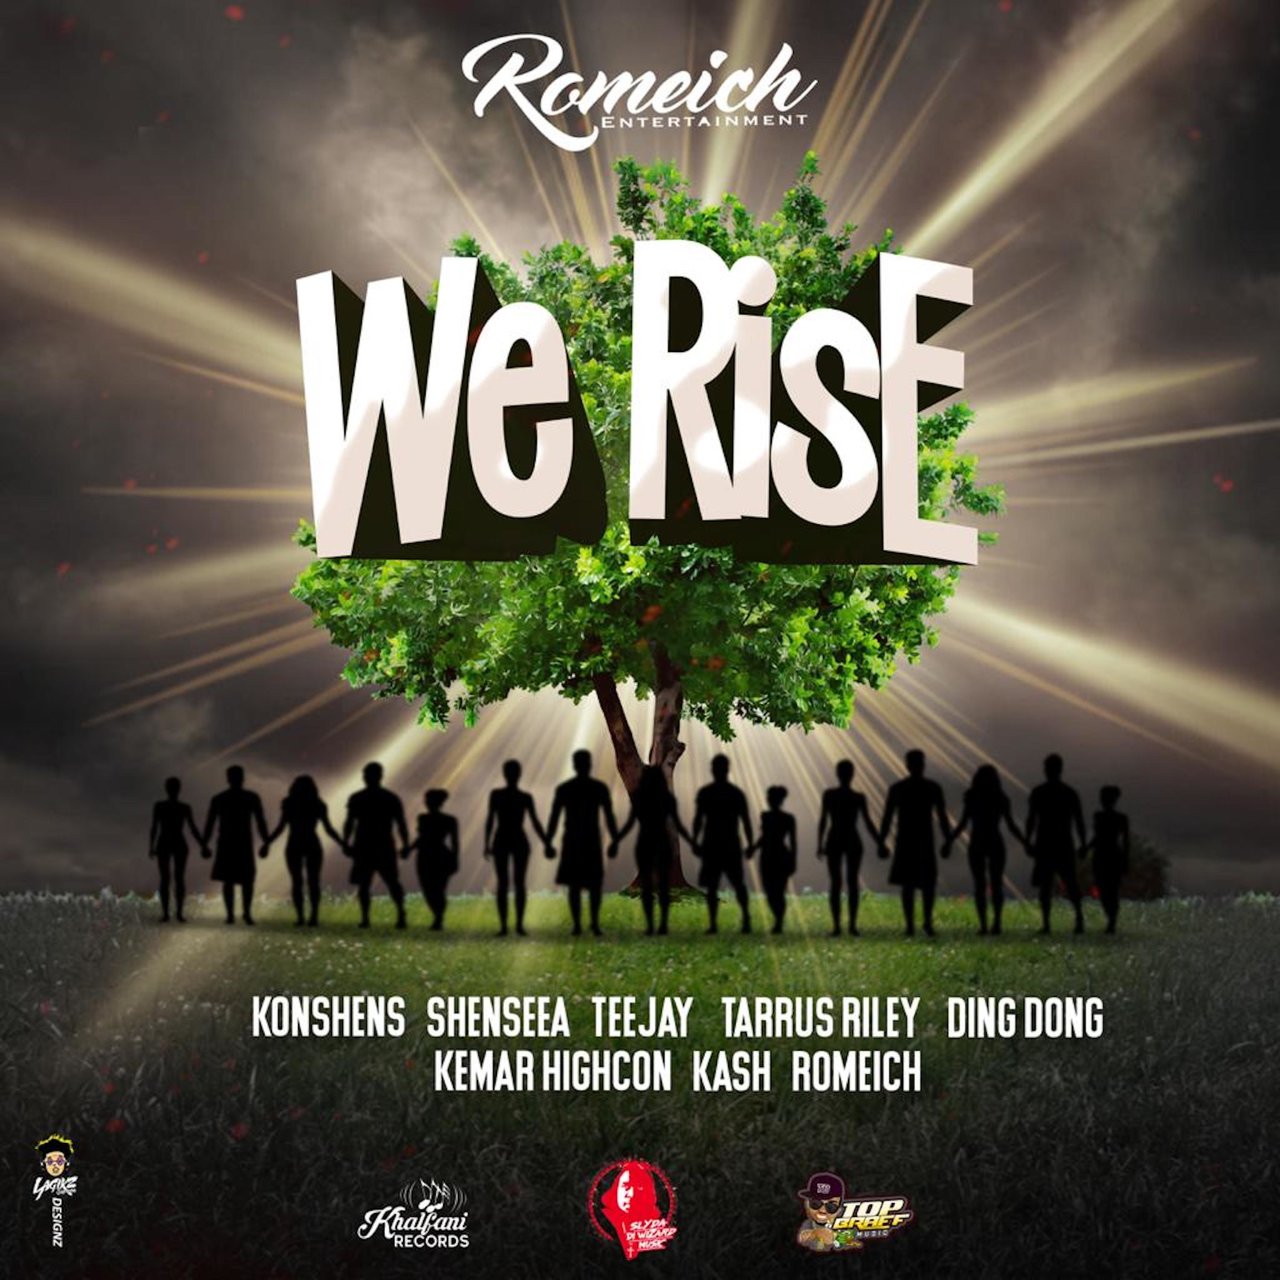 Romeich - We Rise (Cover)